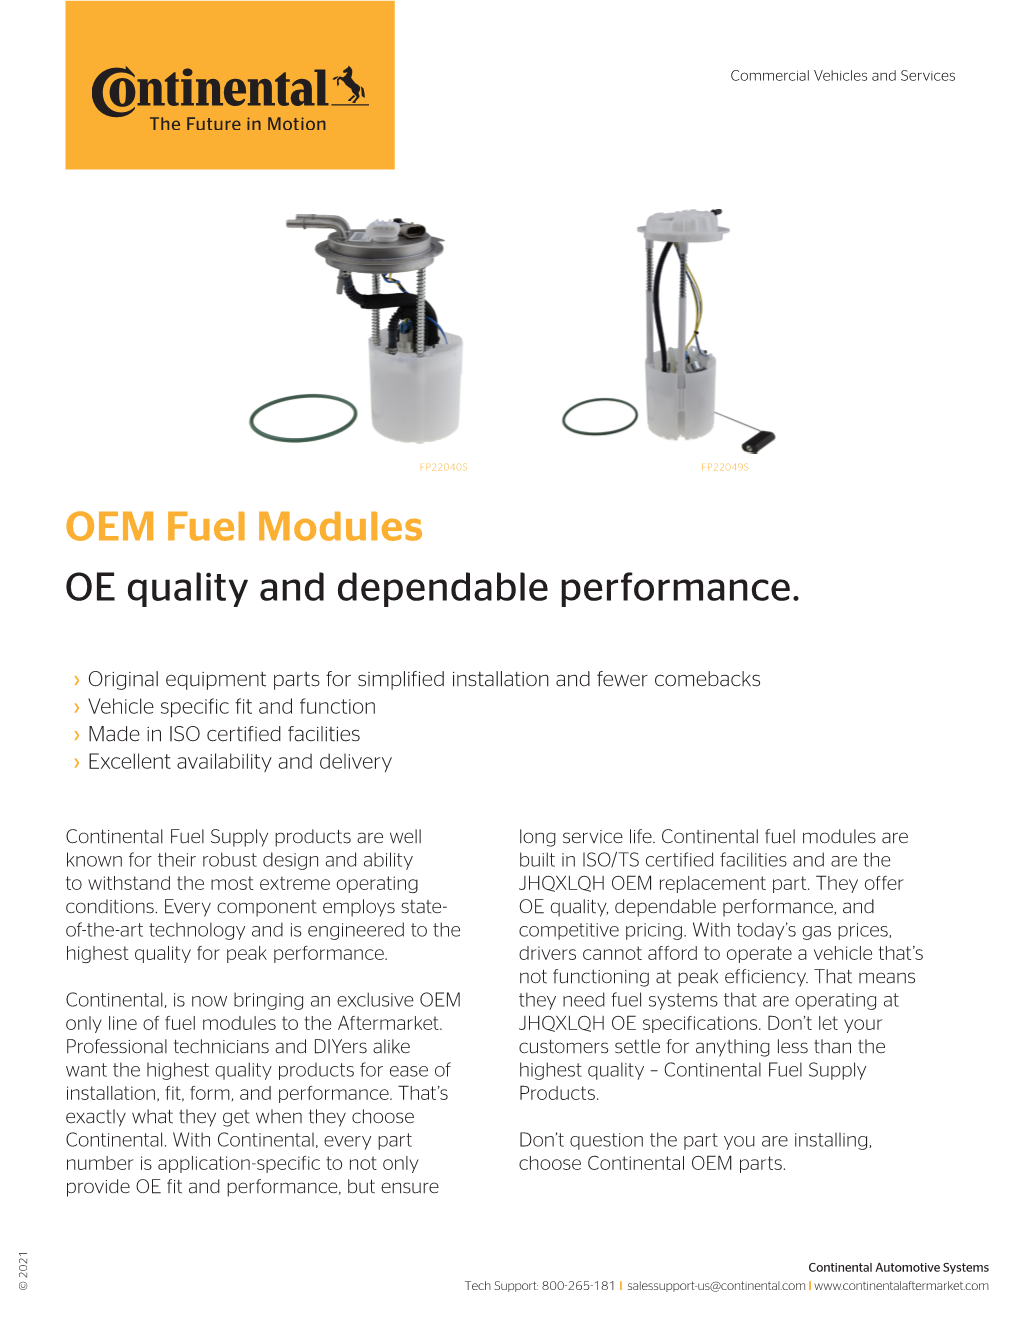 OEM Fuel Modules OE Quality and Dependable Performance